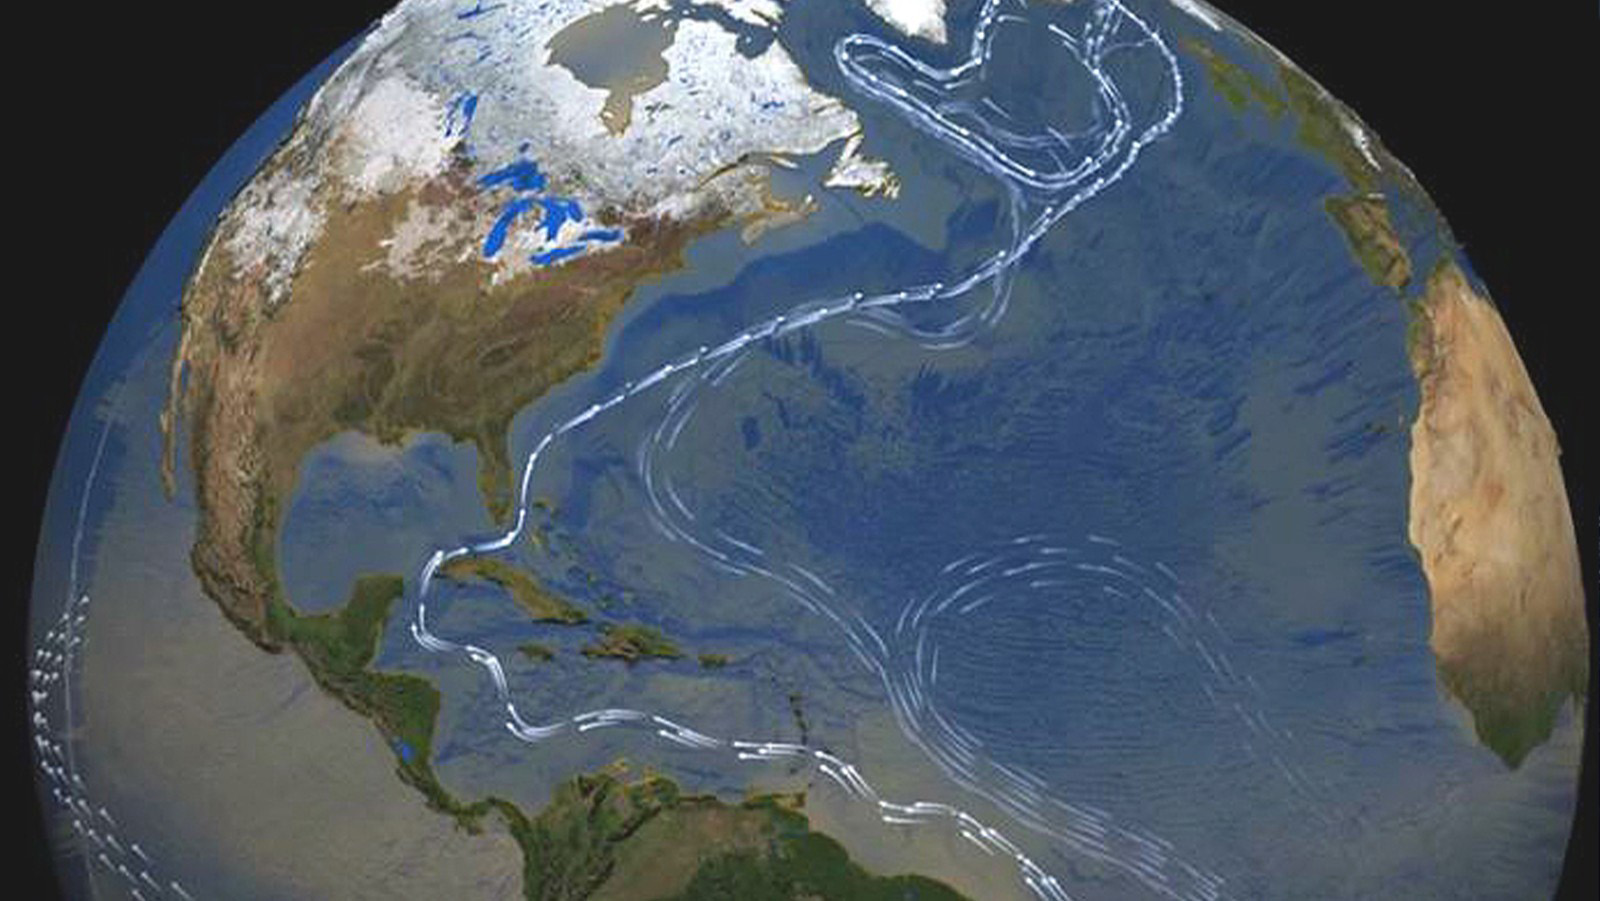 Satellite image of the Earth with the Atlantic Meridional Overturning Circulation modeled using directional arrows to mark the currents